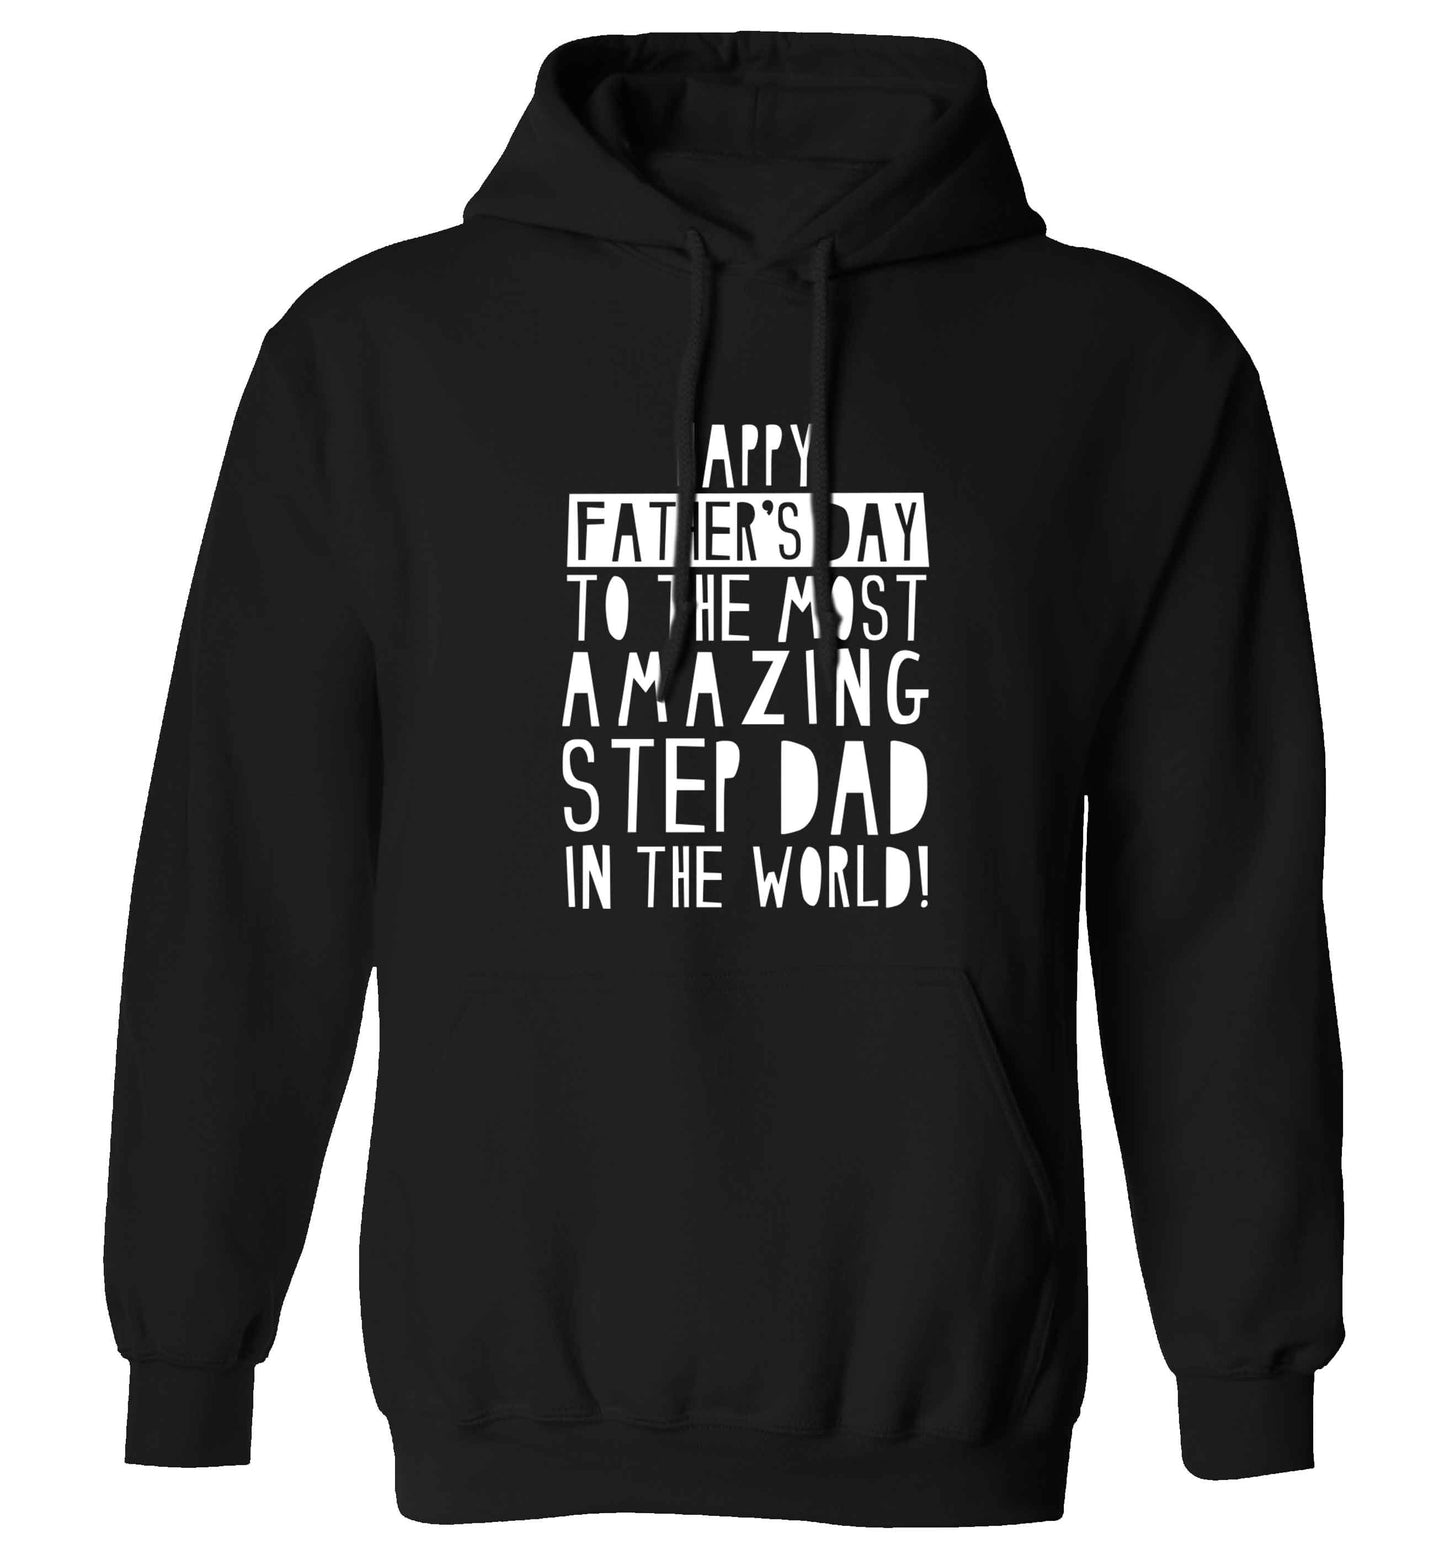 Happy Father's day to the best step dad in the world adults unisex black hoodie 2XL